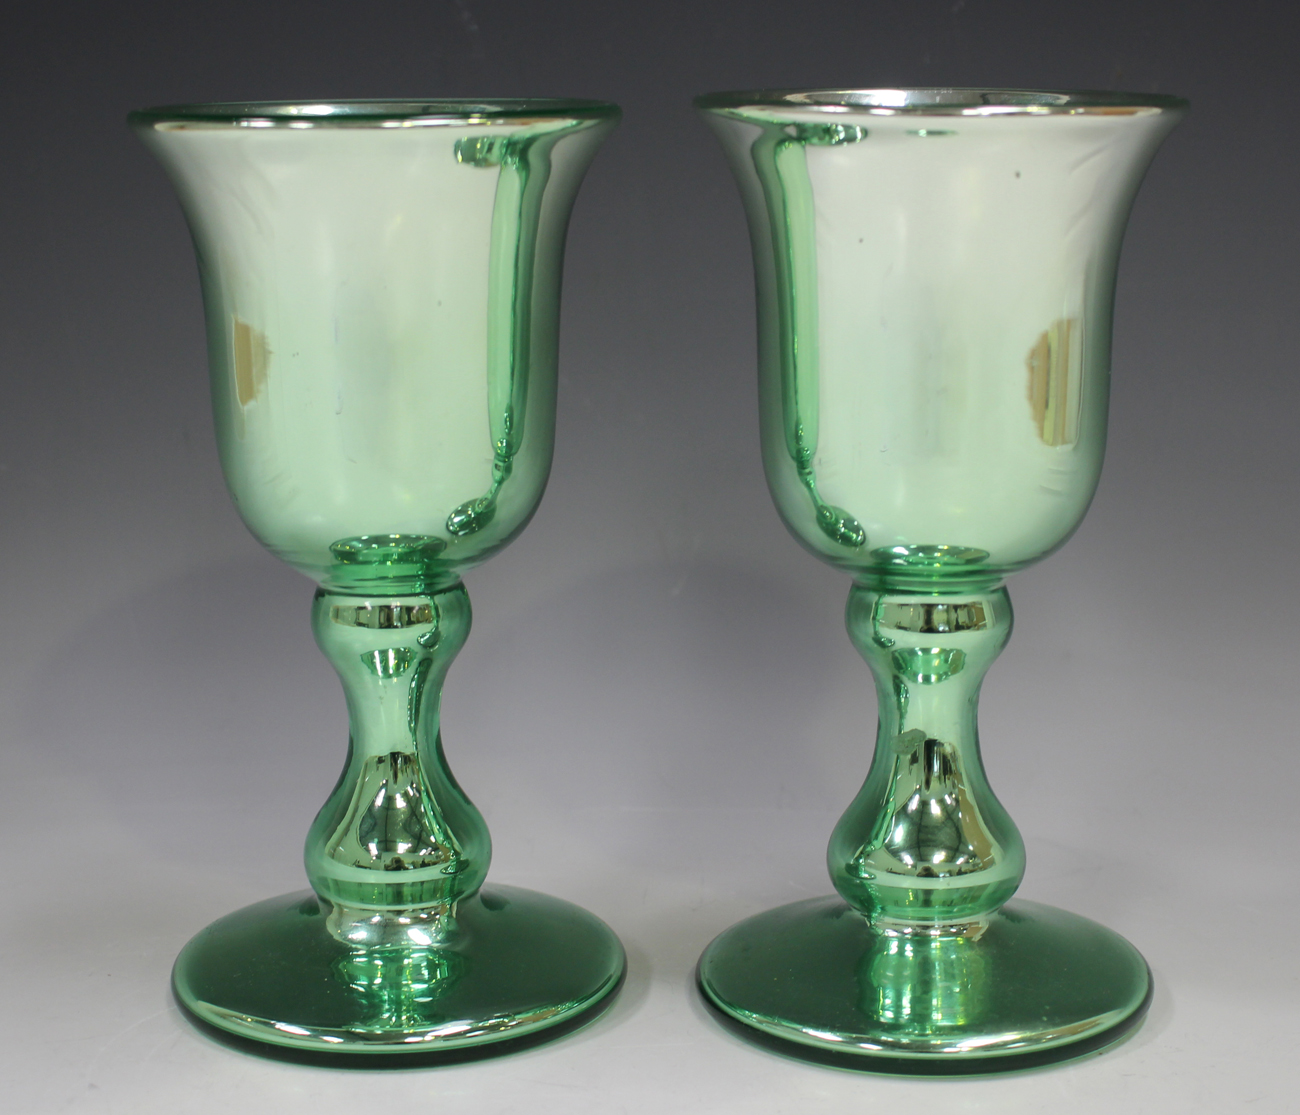 A pair of Hale Thomson silvered Varnish Patent glass goblets, circa 1850, of pale green tint, the